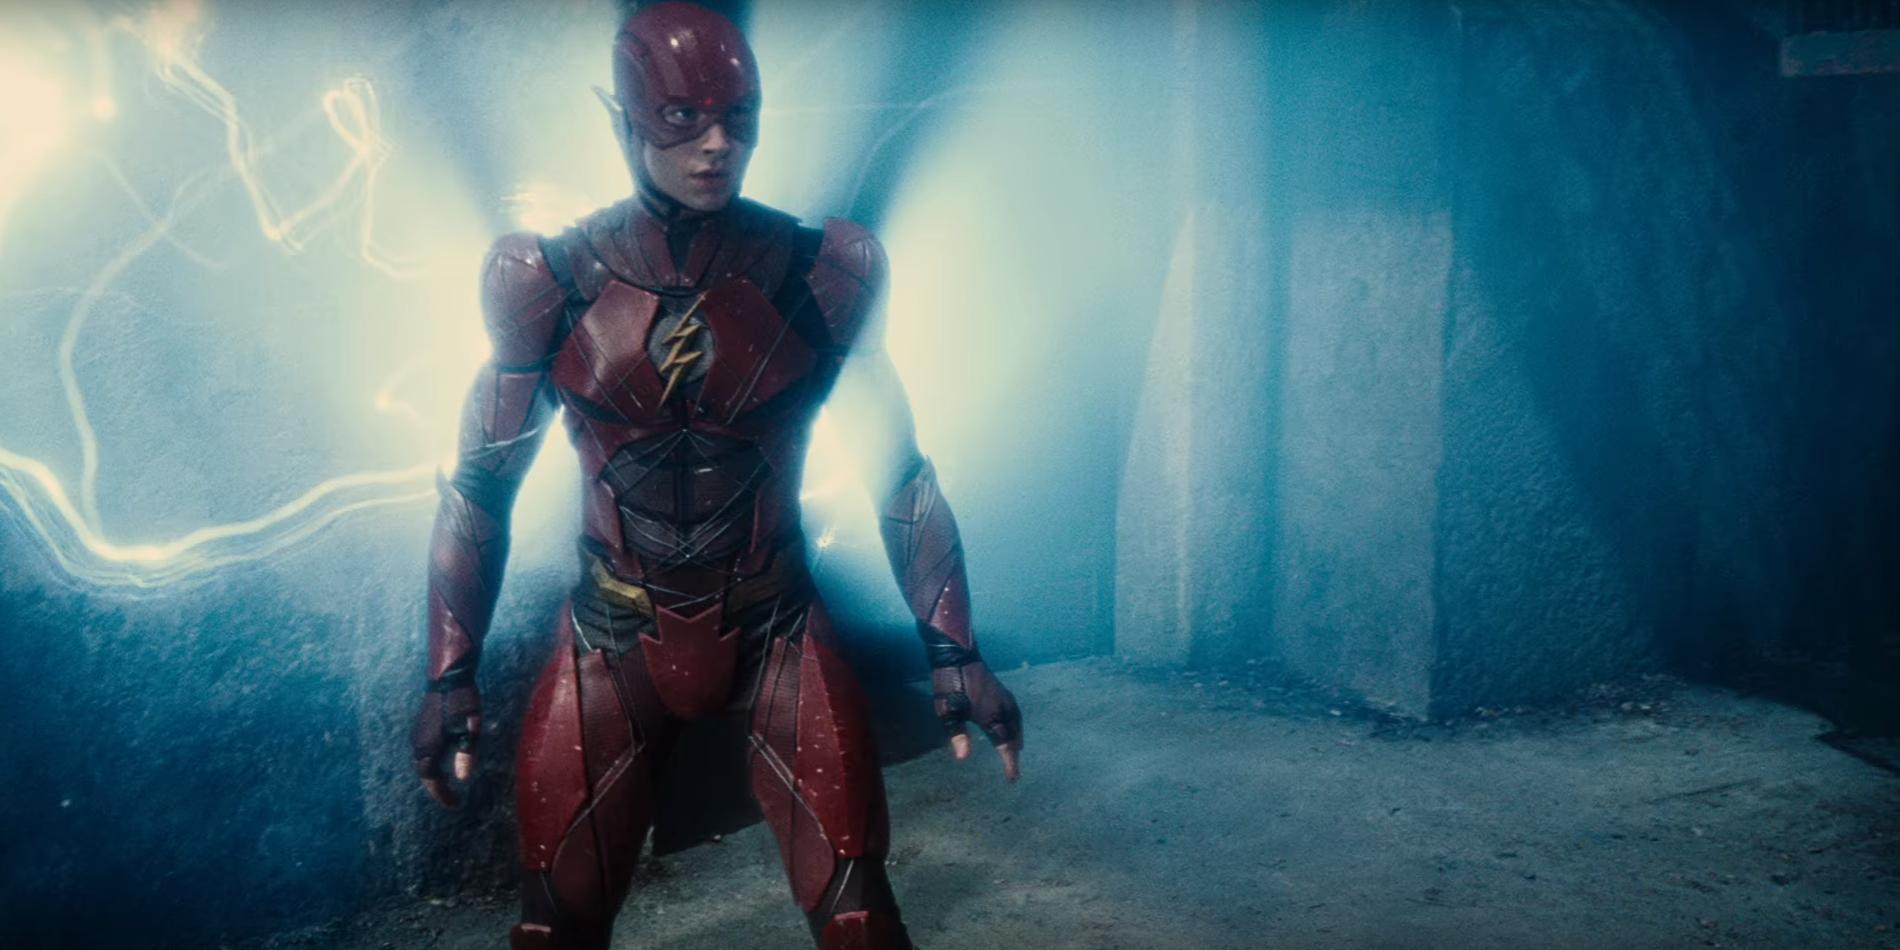 The Flash in Justice League